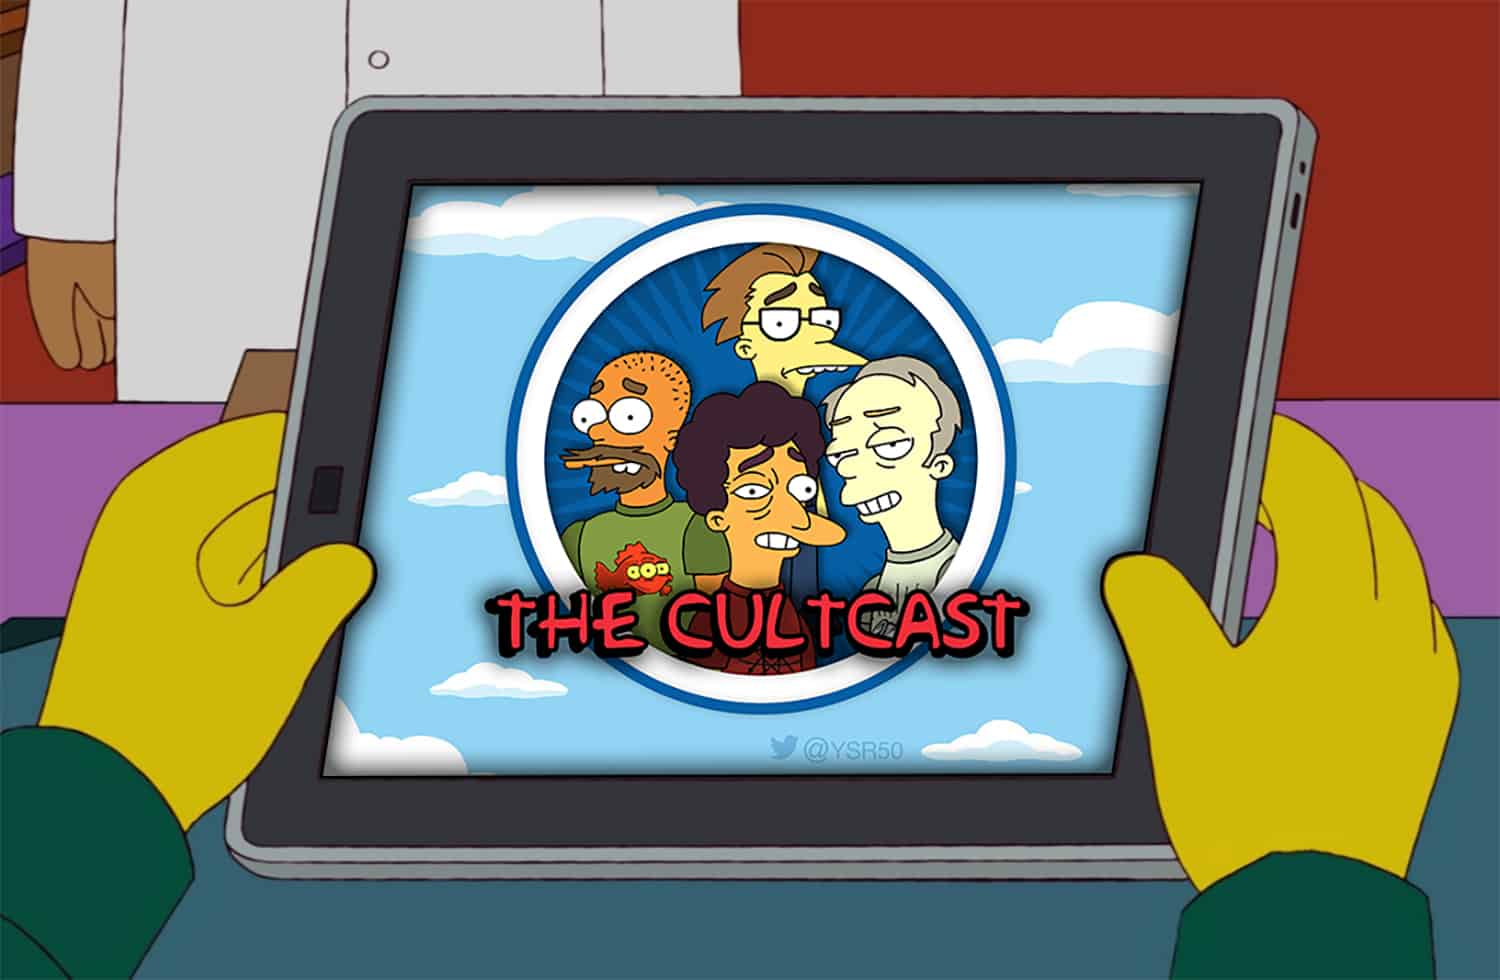 The CultCast: The best 30-minute Apple podcast you'll hear anywhere.